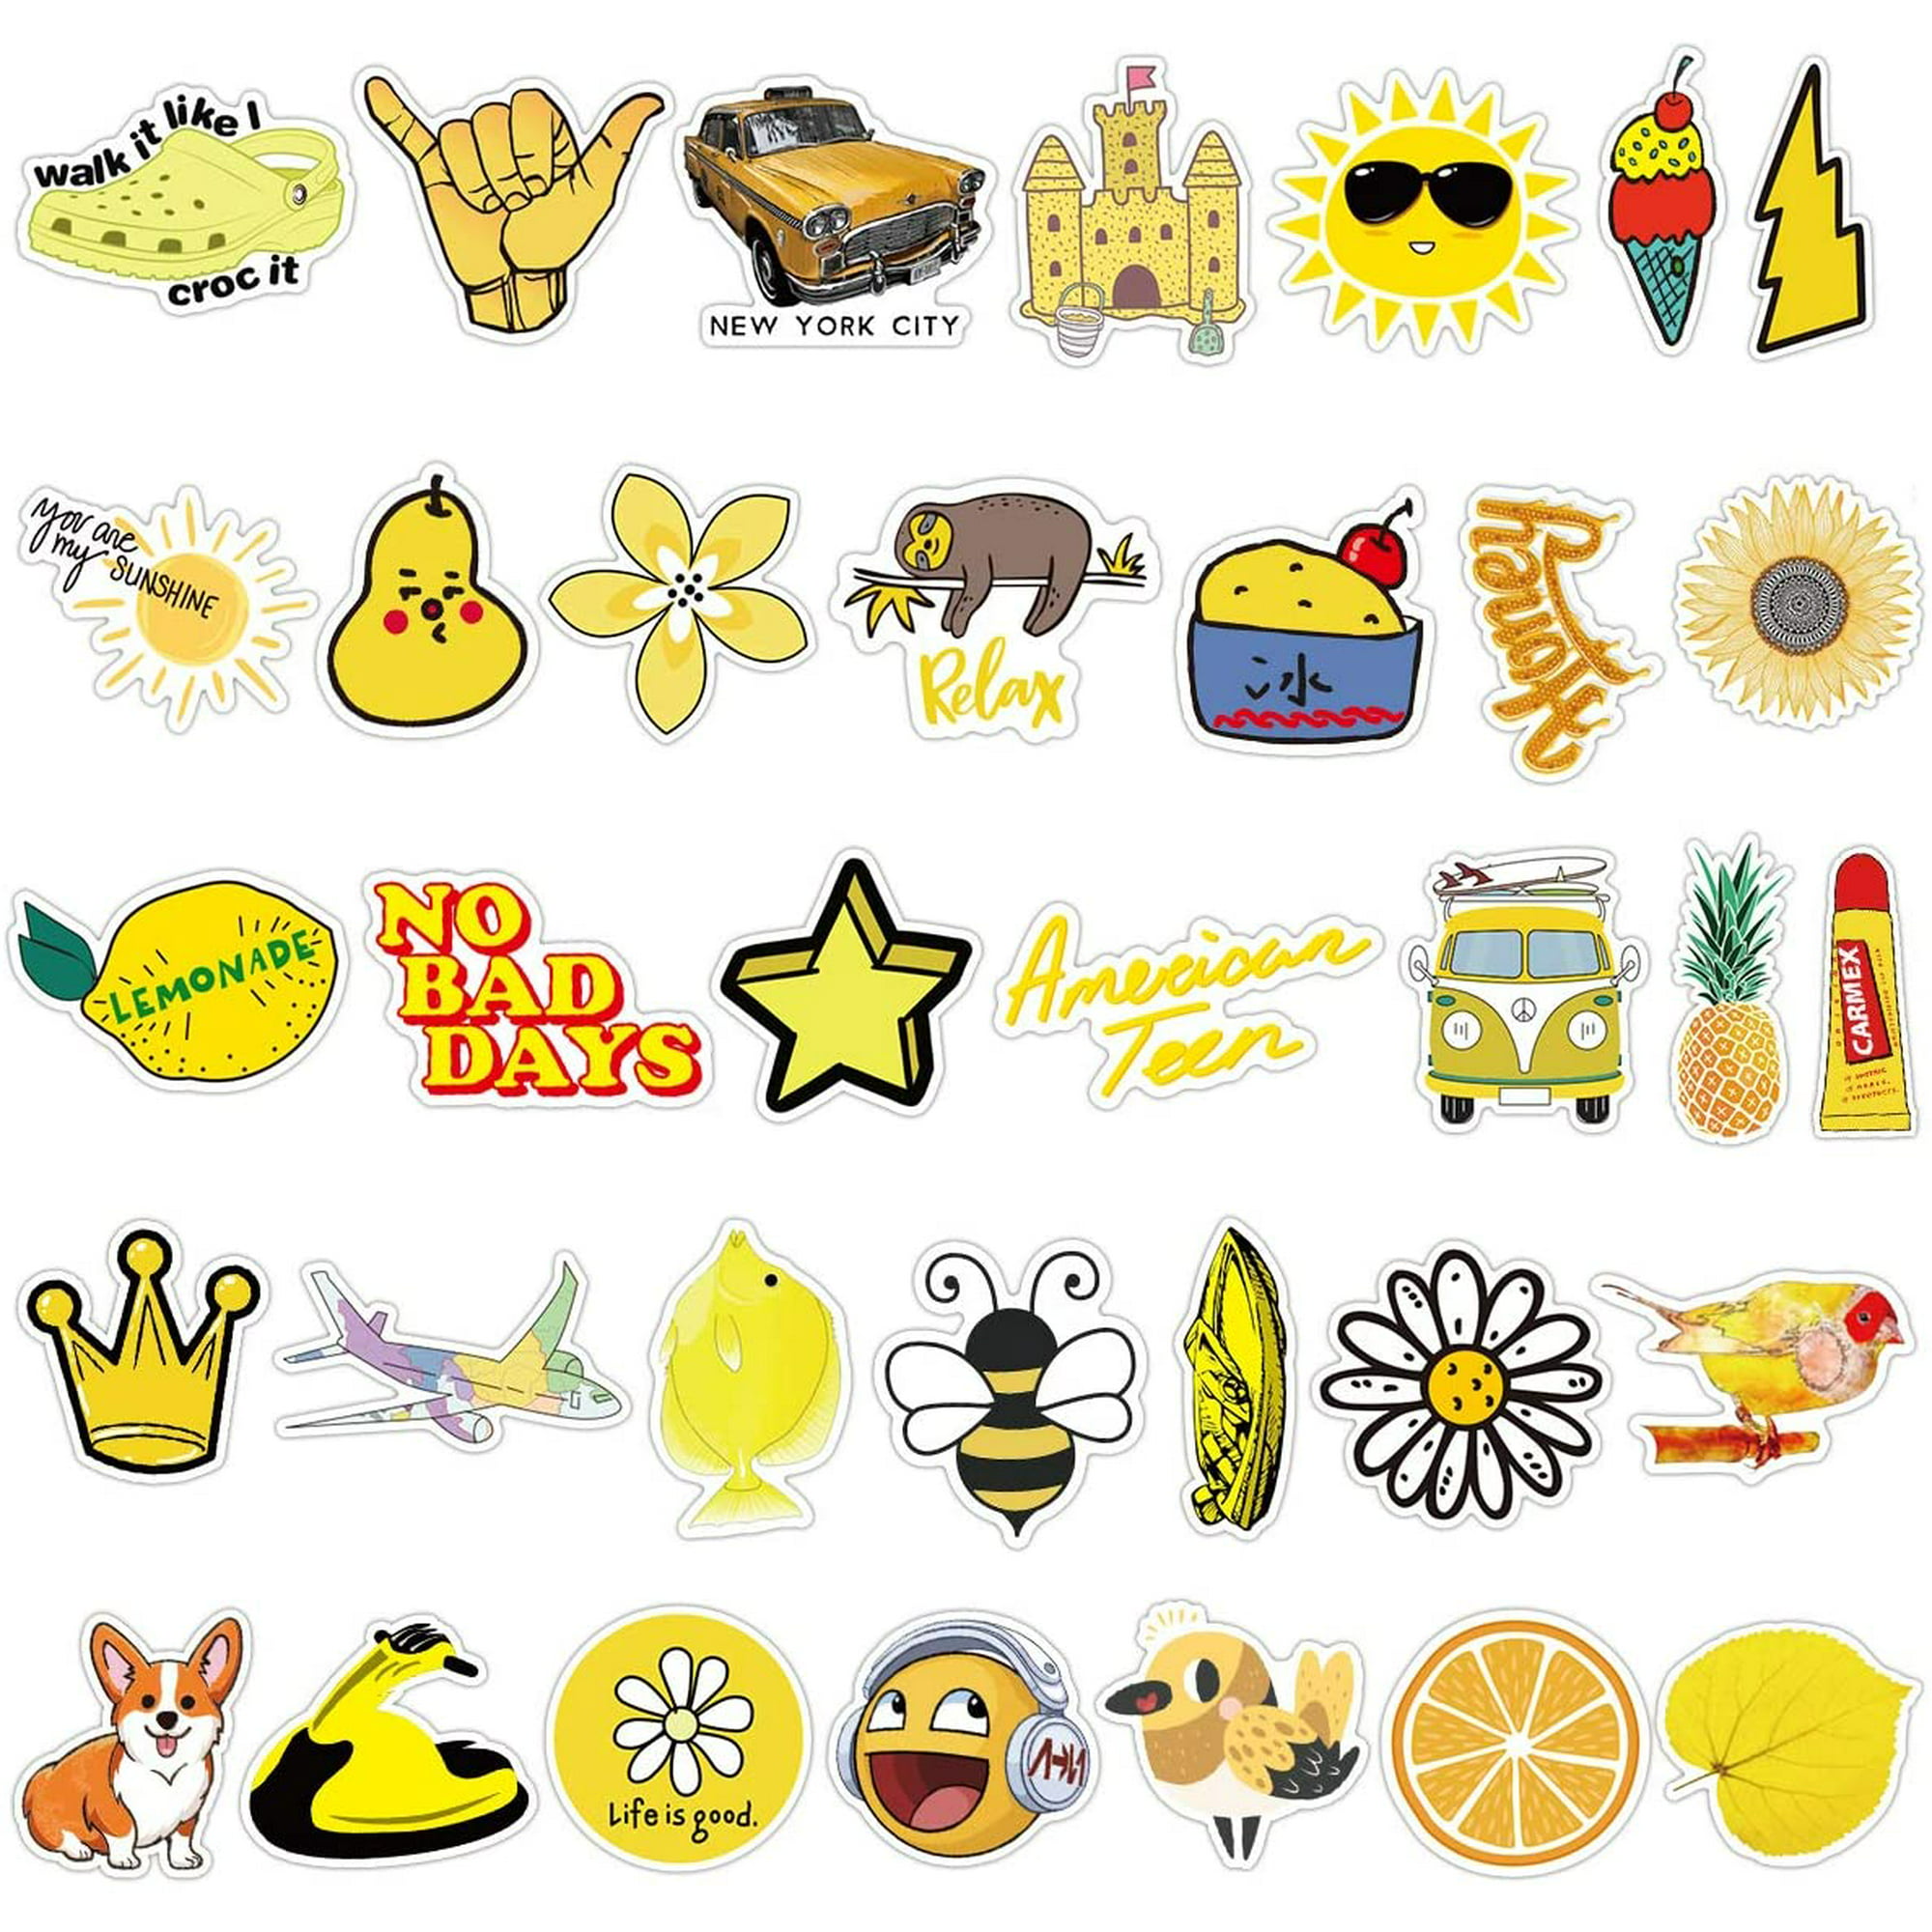 ,Popular Skins Sticker Set for Kids,Gamer Adults Teens Boys and Girls,Waterproof Stickers for Water Bottles,Skateboard,Bike,Luggage,PS4,Xbos 164pcs shuyilong Gaming Stickers Pack